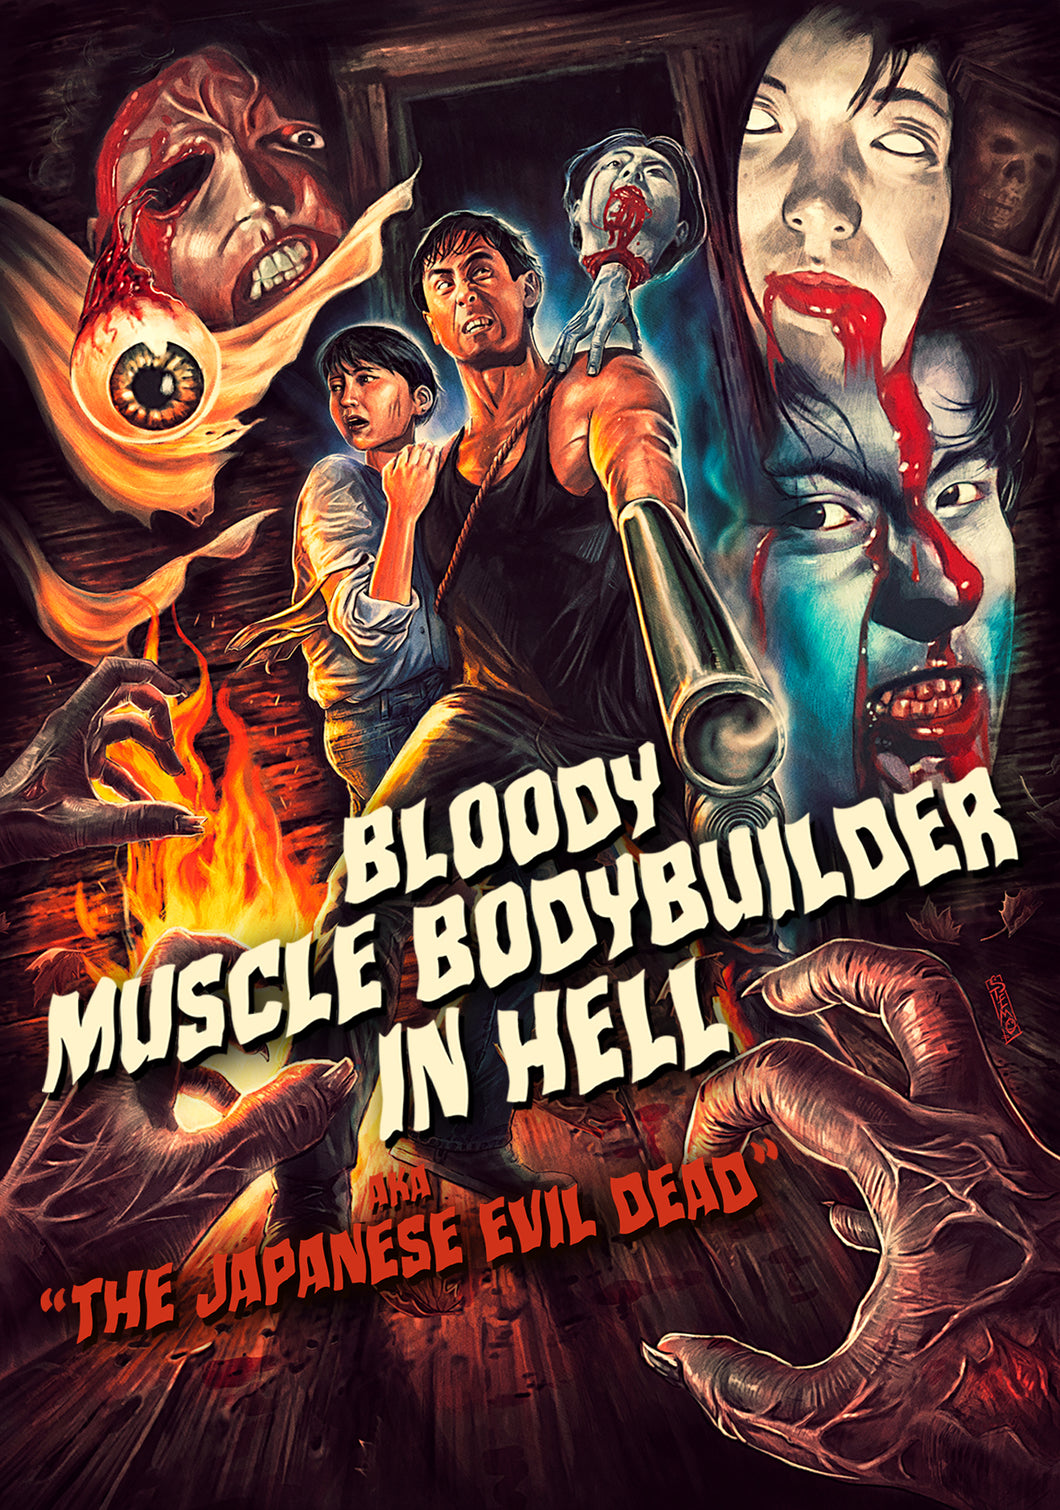 Bloody Muscle Body Builder in Hell